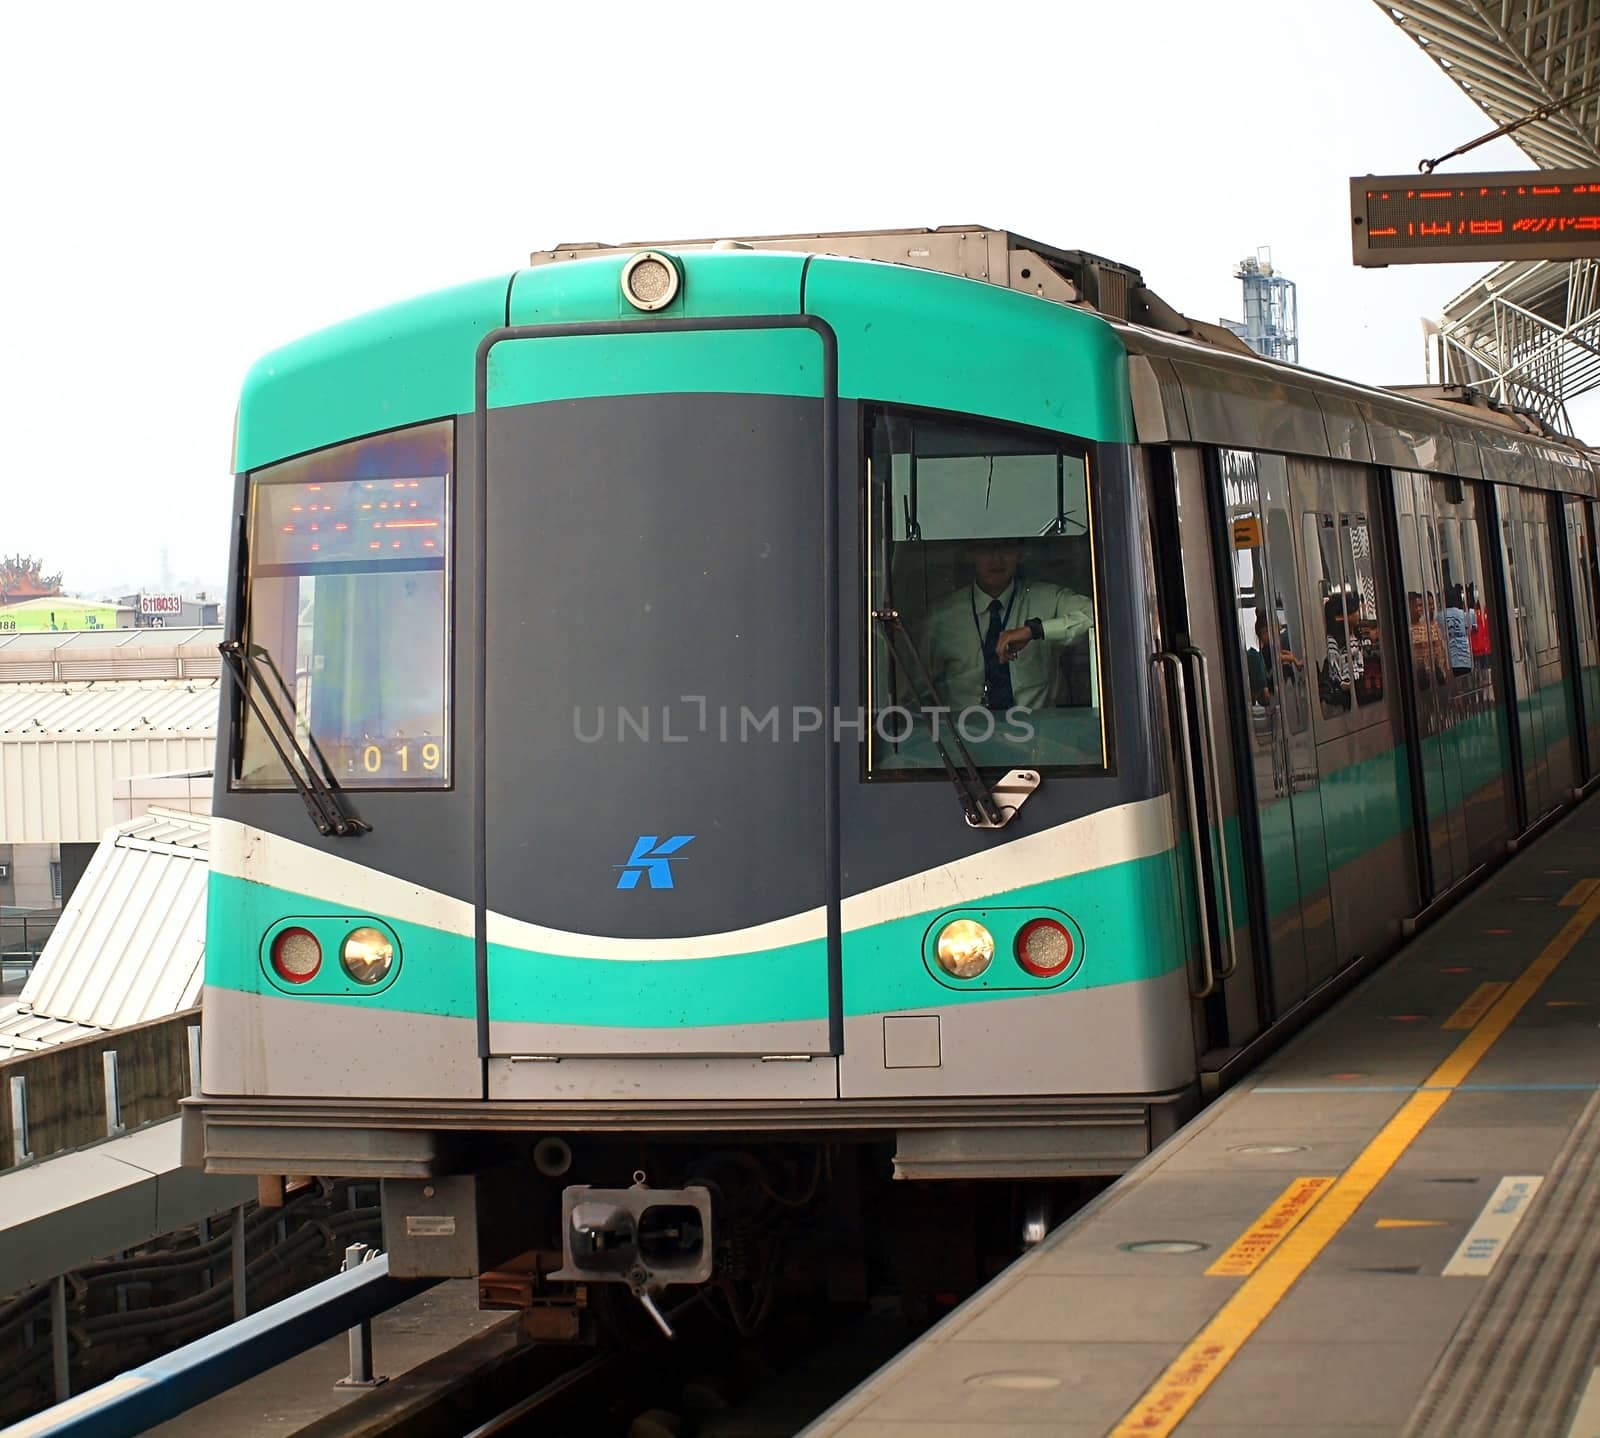 QIAOTOU, TAIWAN -- NOVEMBER 24, 2013: A train of the Kaohsiung Mass Rapid Transit System pulls into Qiaotou station.